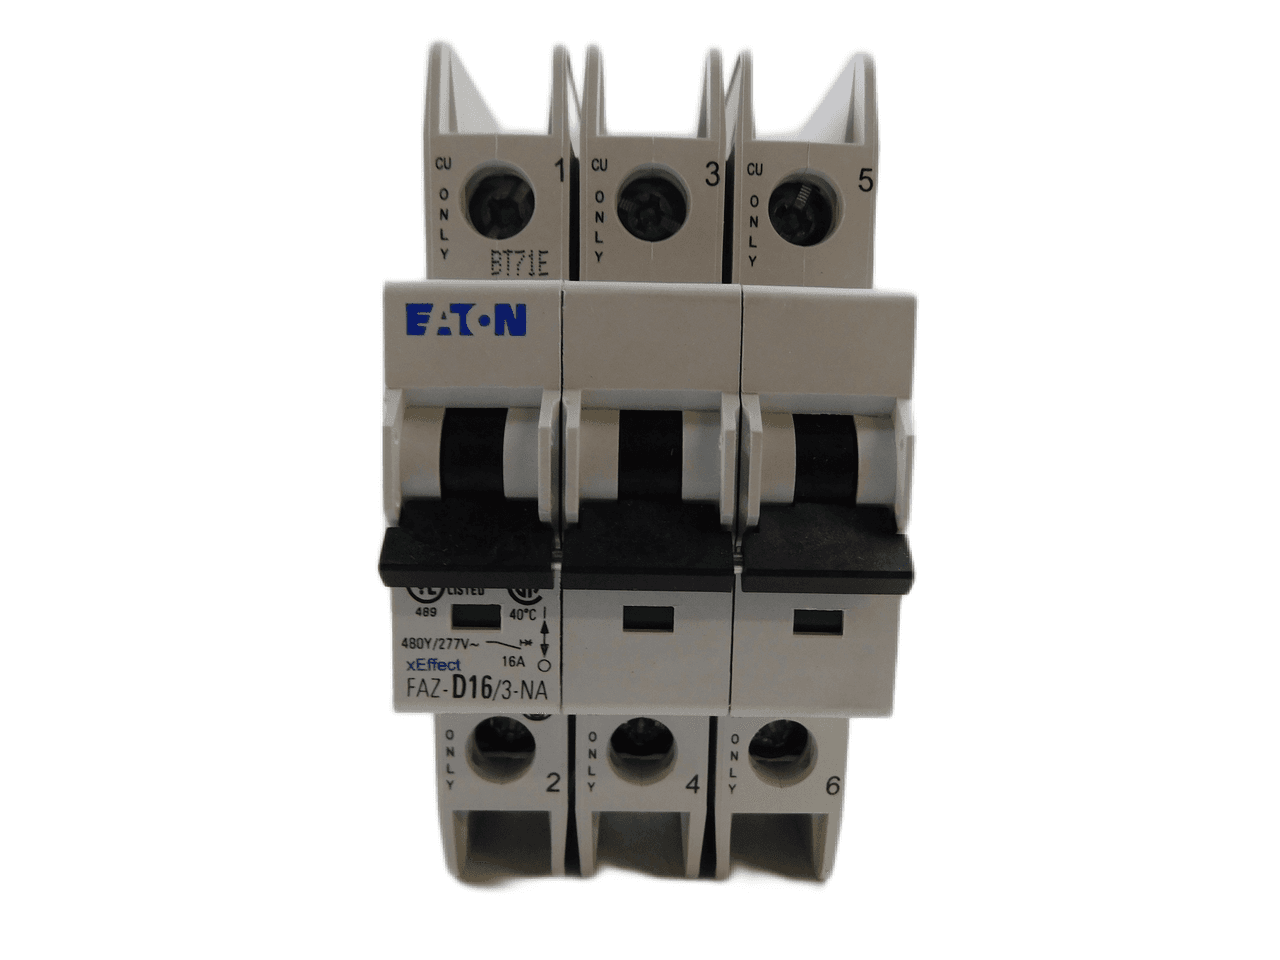 Eaton FAZ-D16/3-NA 277/480 VAC 50/60 Hz, 16 A, 3-Pole, 10/14 kA, 10 to 20 x Rated Current, Screw Terminal, DIN Rail Mount, Standard Packaging, D-Curve, Current Limiting, Thermal Magnetic